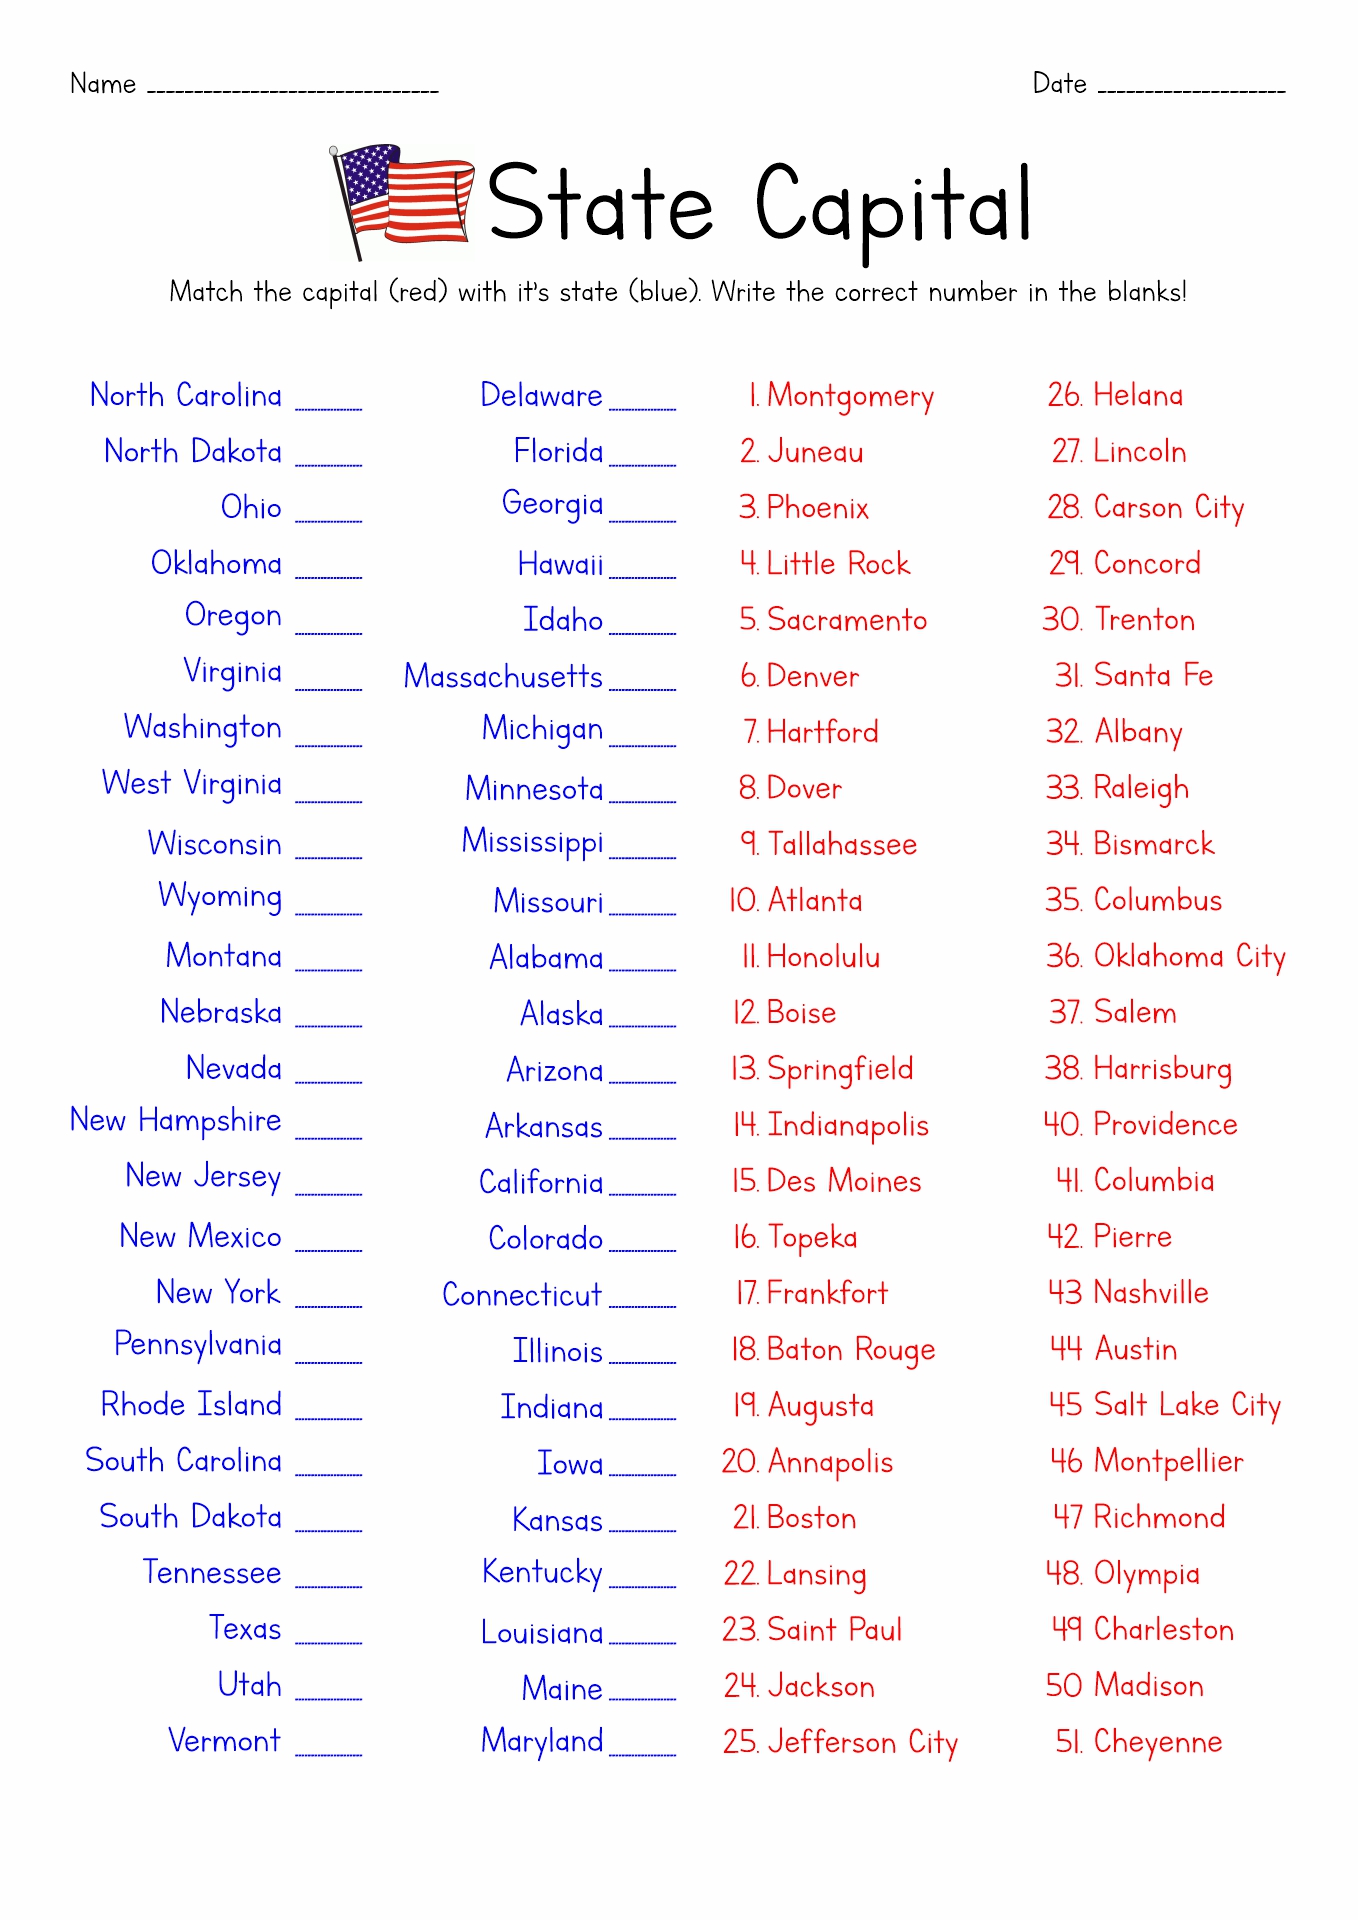 states-and-capitals-sheet